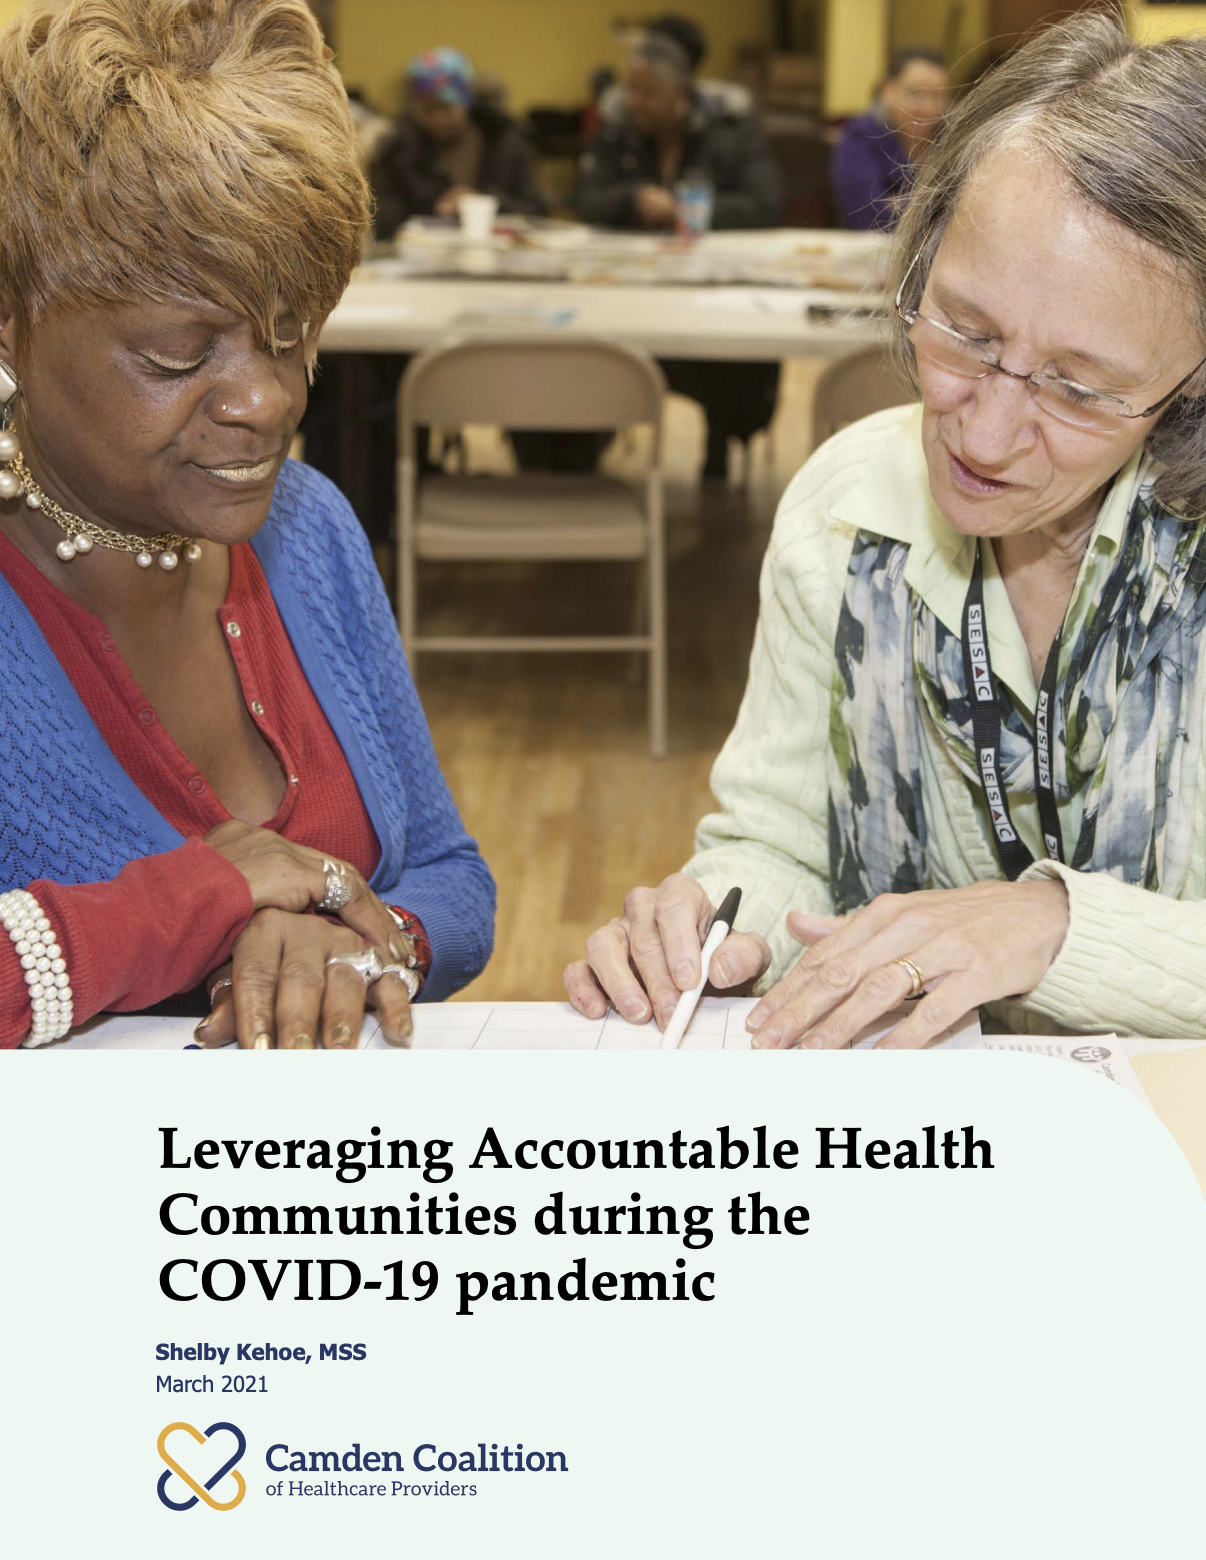 Leveraging Accountable Health Communities during the COVID-19 Pandemic